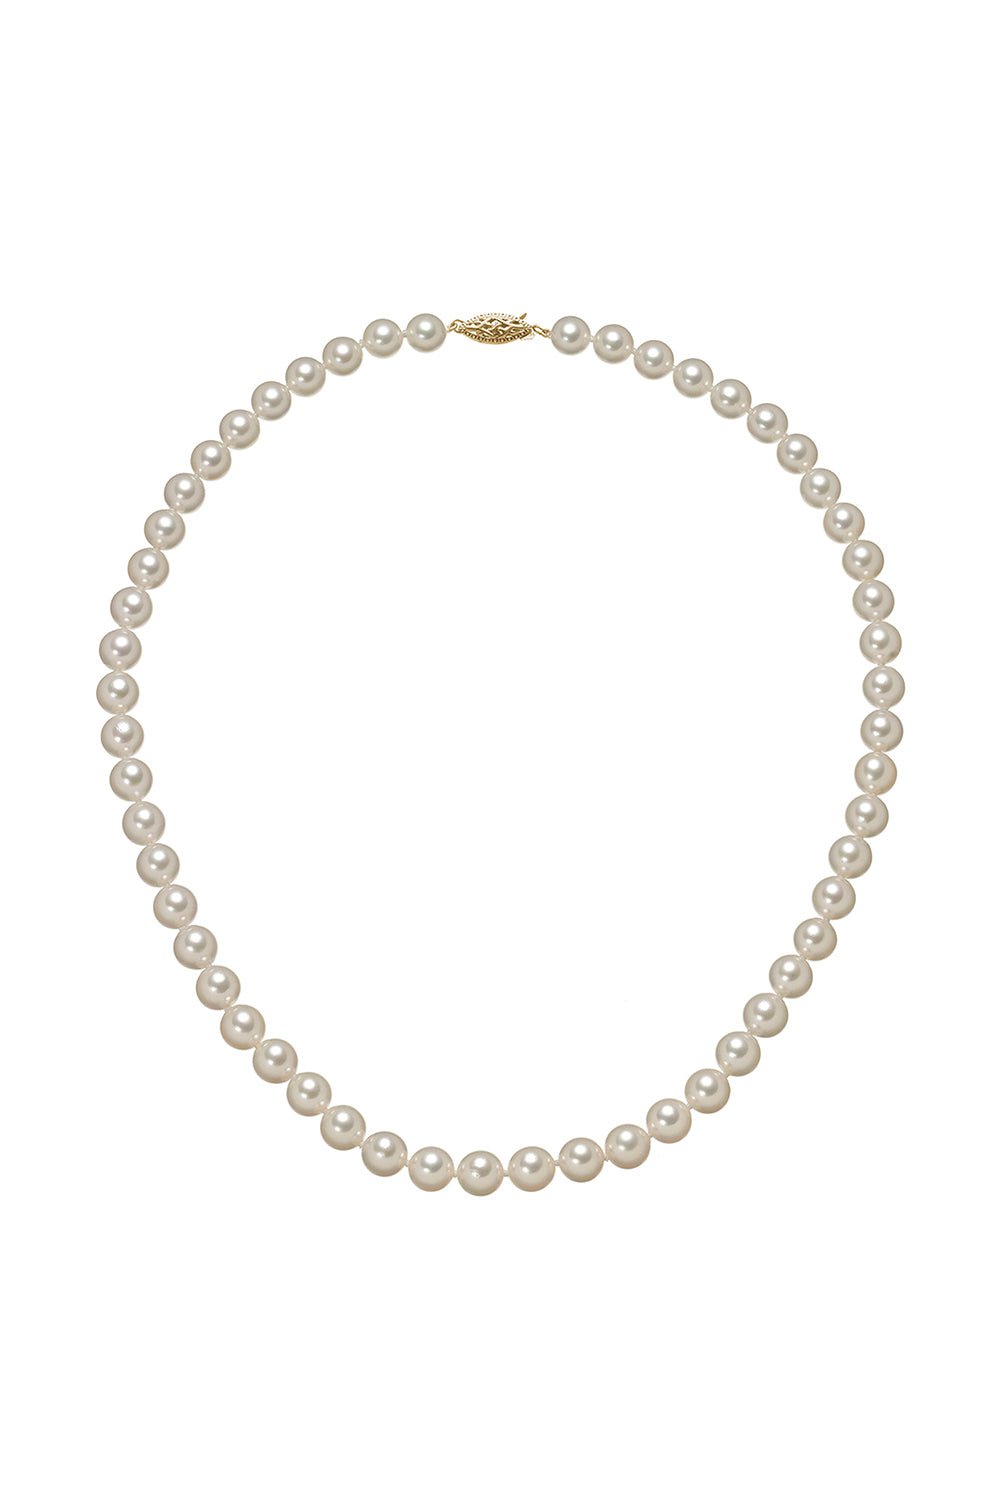 BAGGINS-Classic Akoya Pearl Necklace-YELLOW GOLD